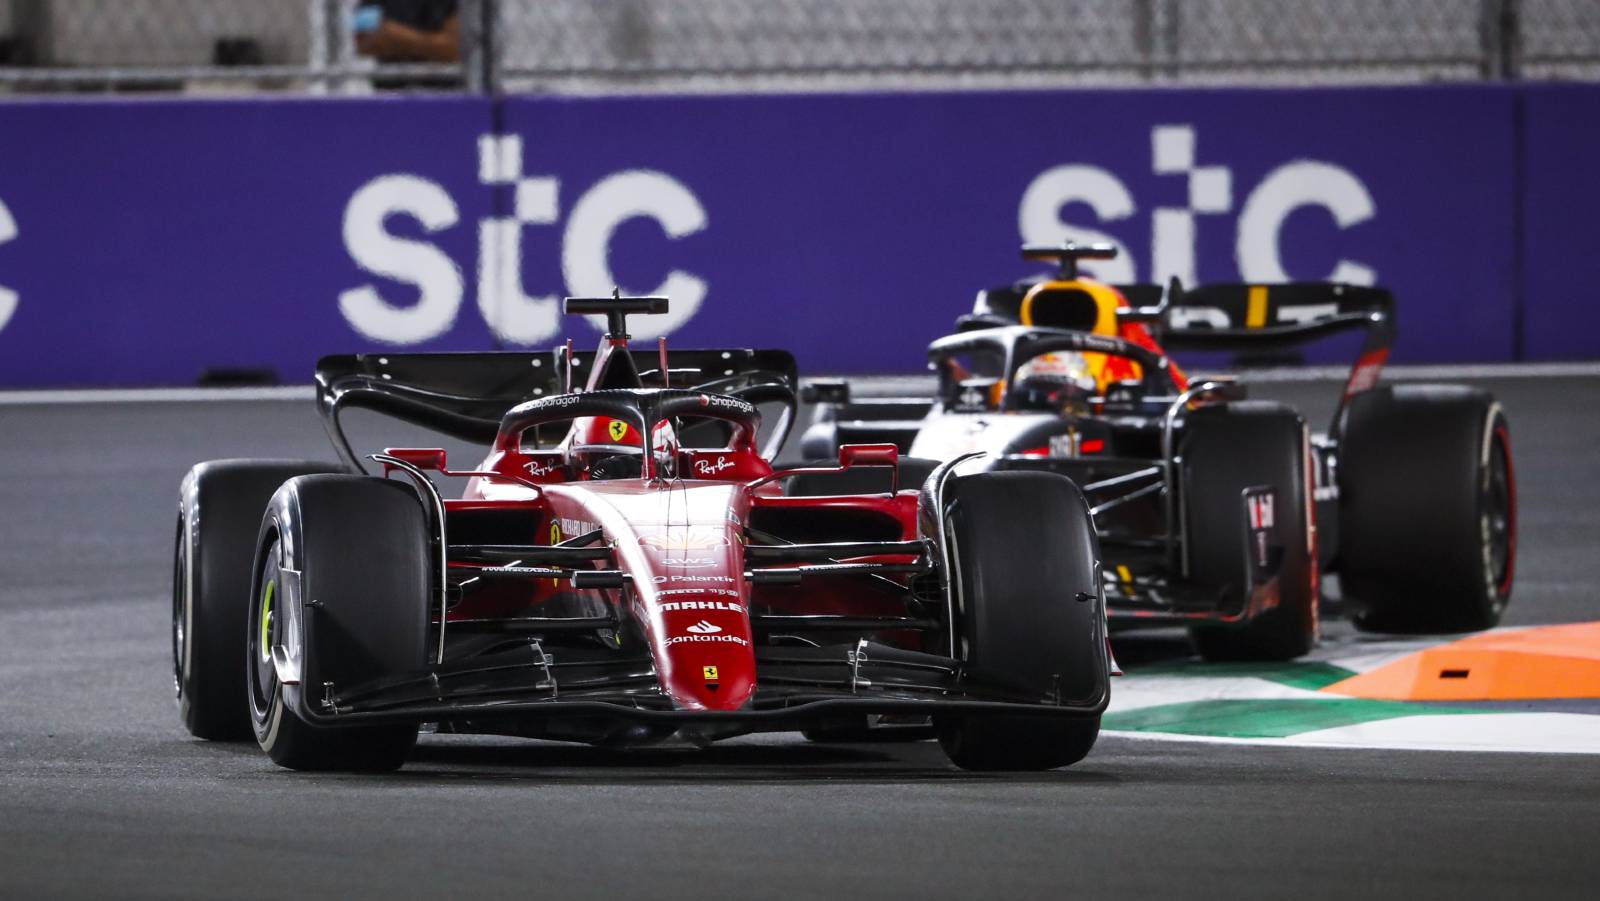 Charles Leclerc just ahead of Max Verstappen. Jeddah March 2022.